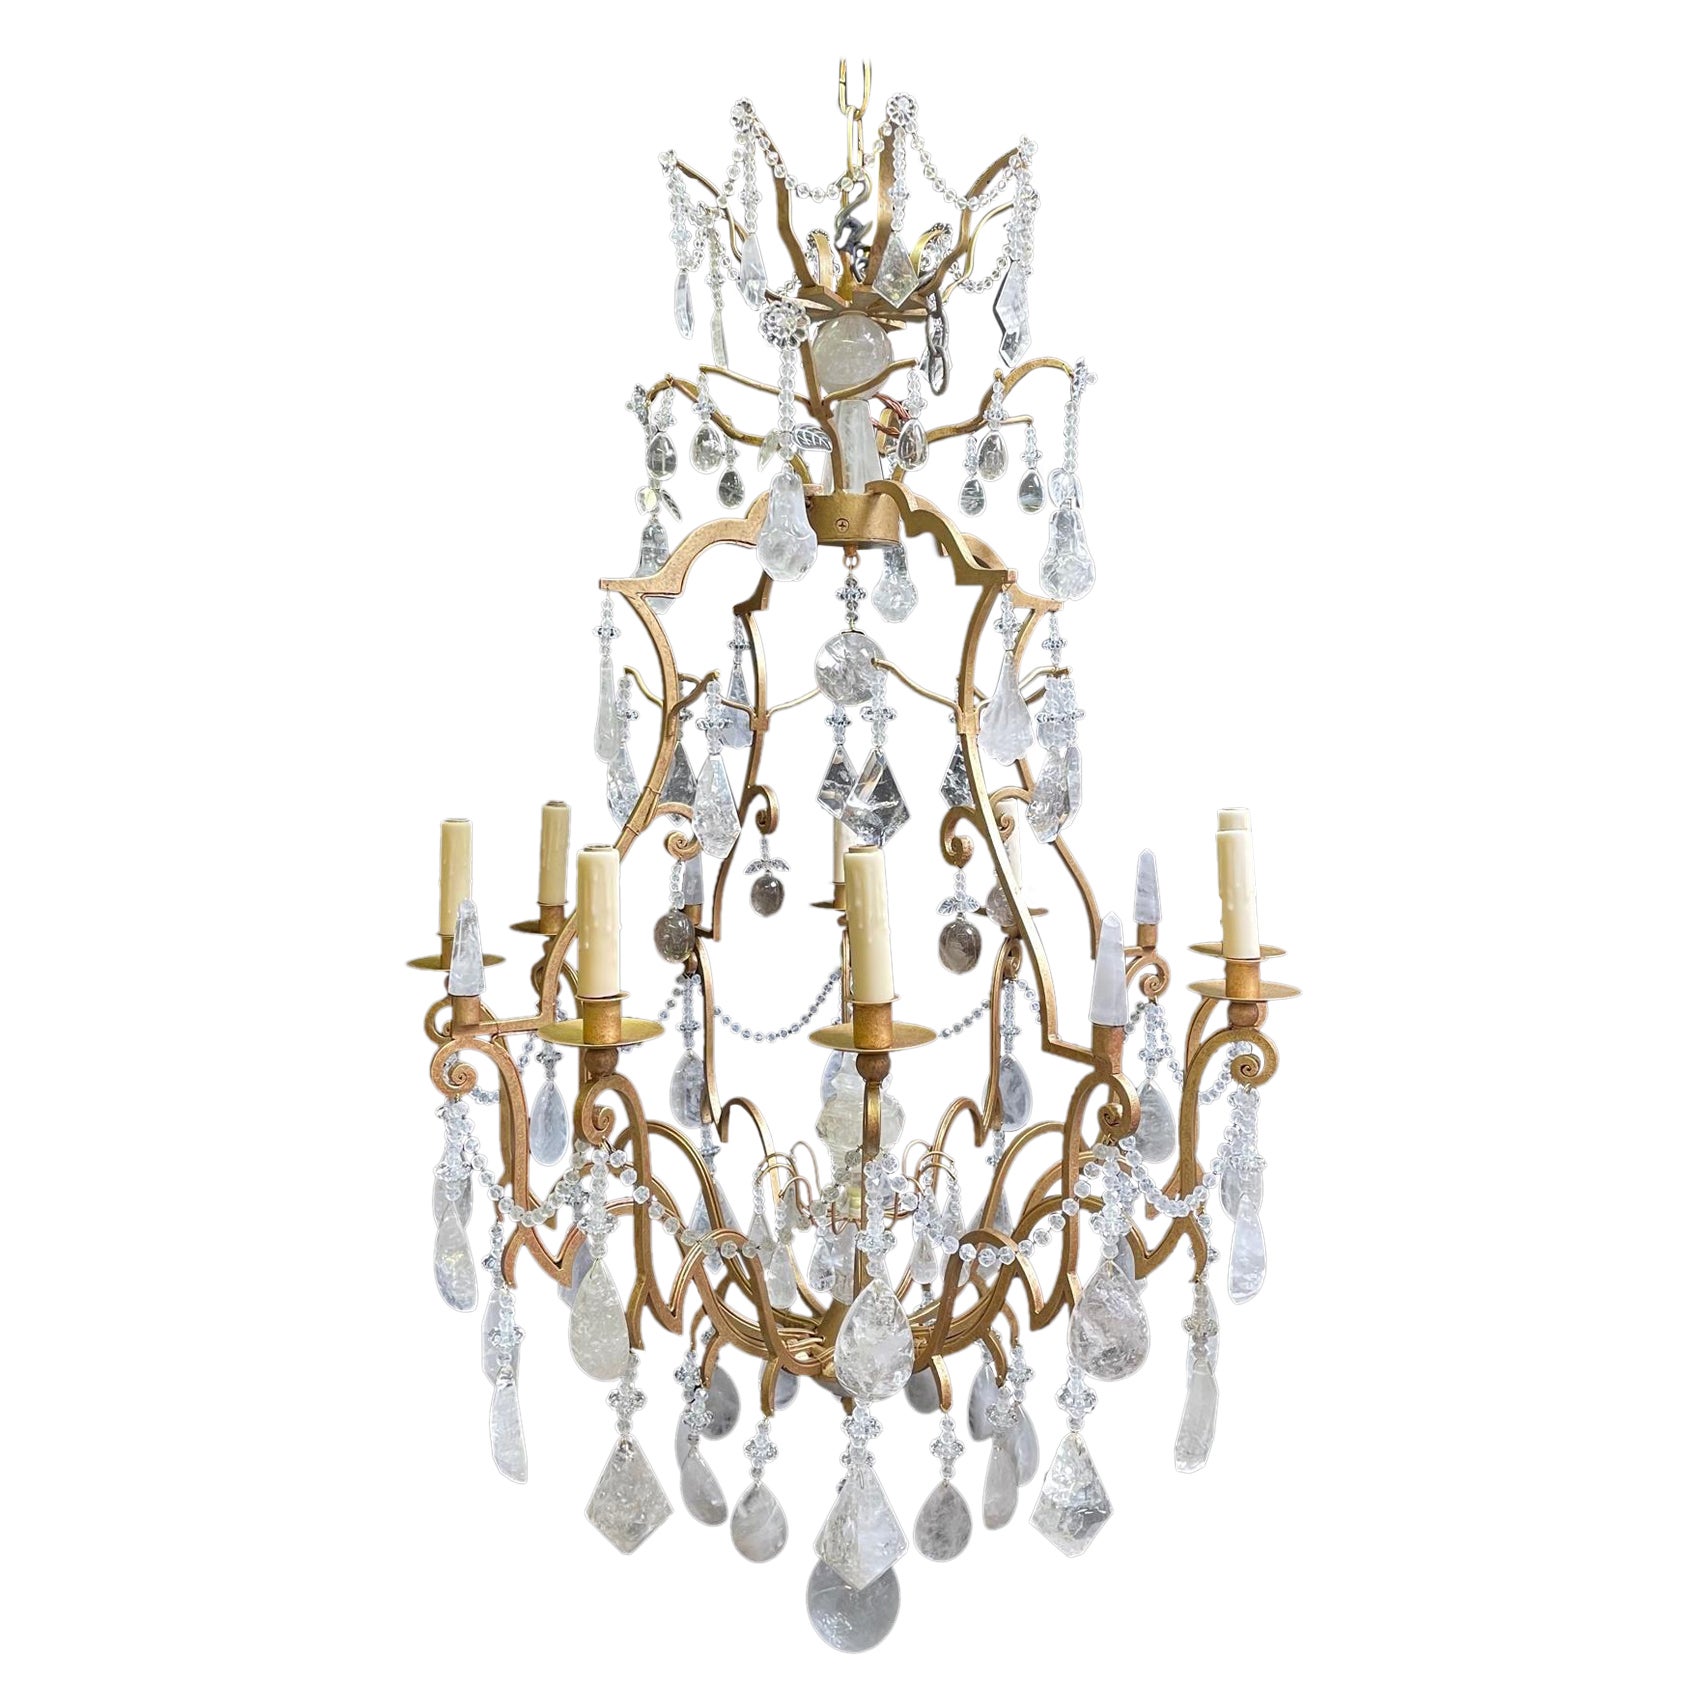 Rock Crystal 8 Light Gilt Chandelier, Louis XV Style For Sale